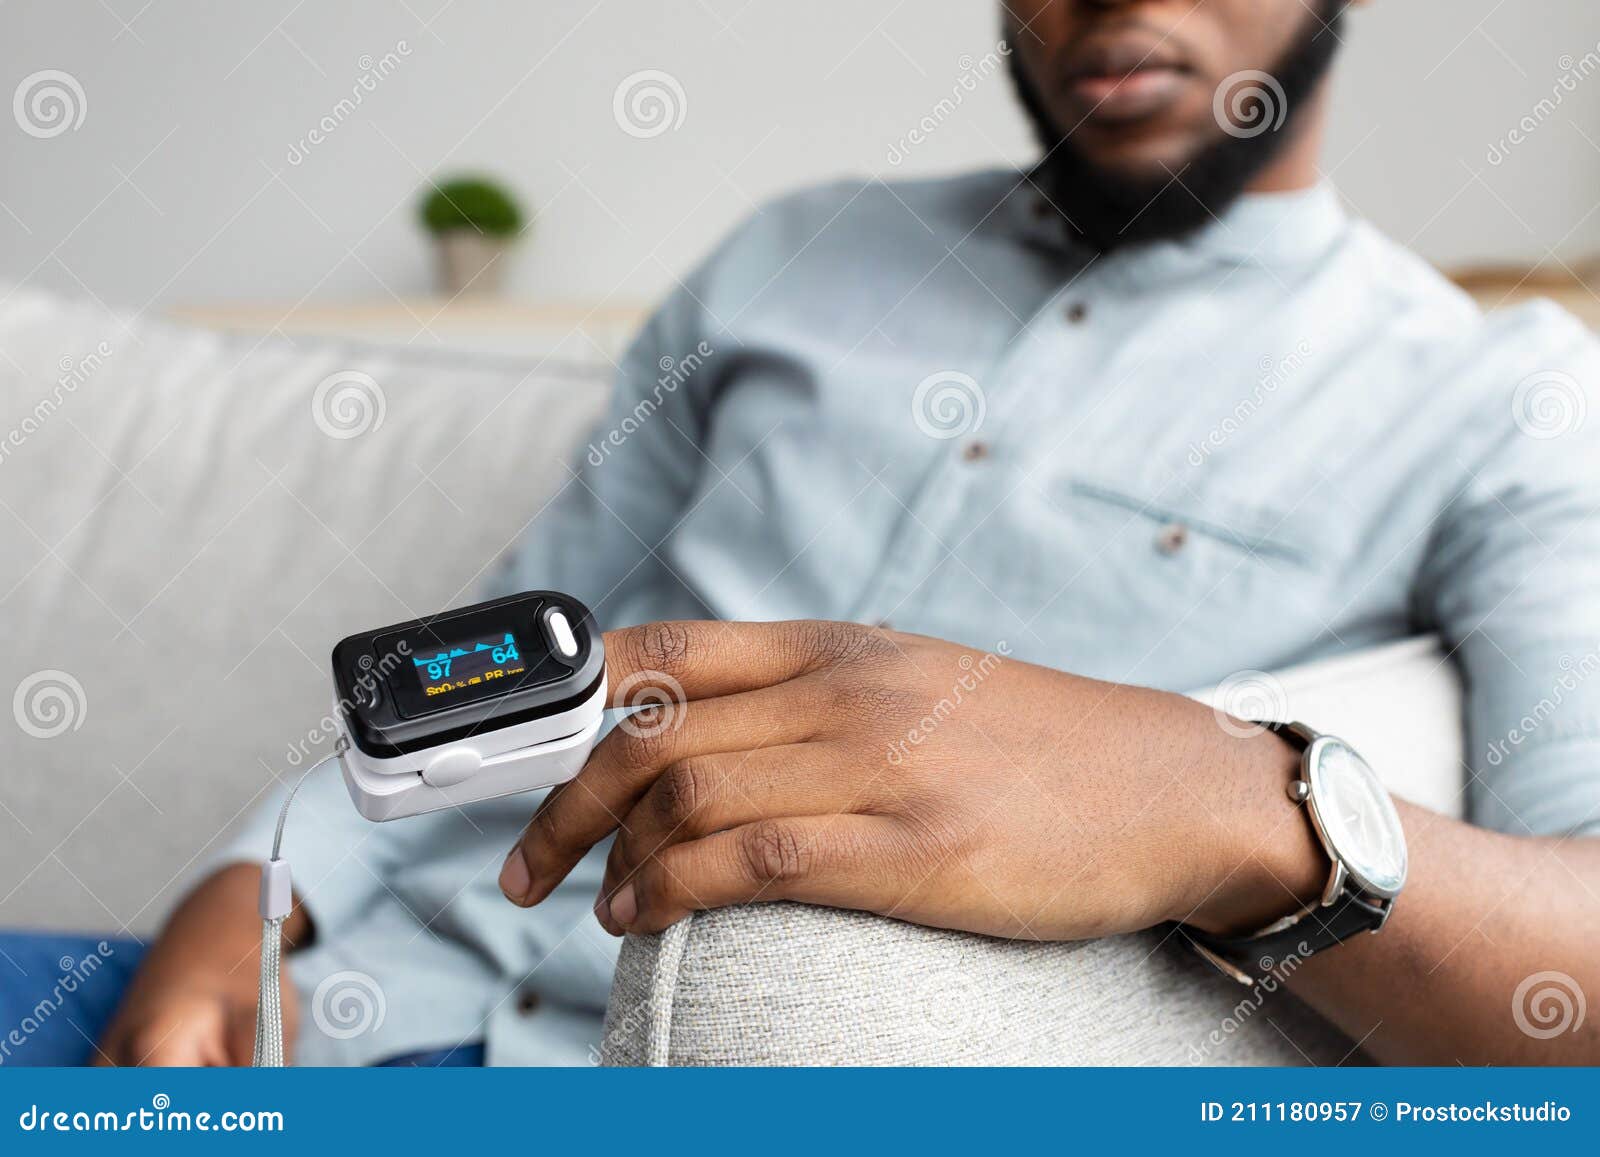 black man with pulse oximeter measuring oxygen saturation at home